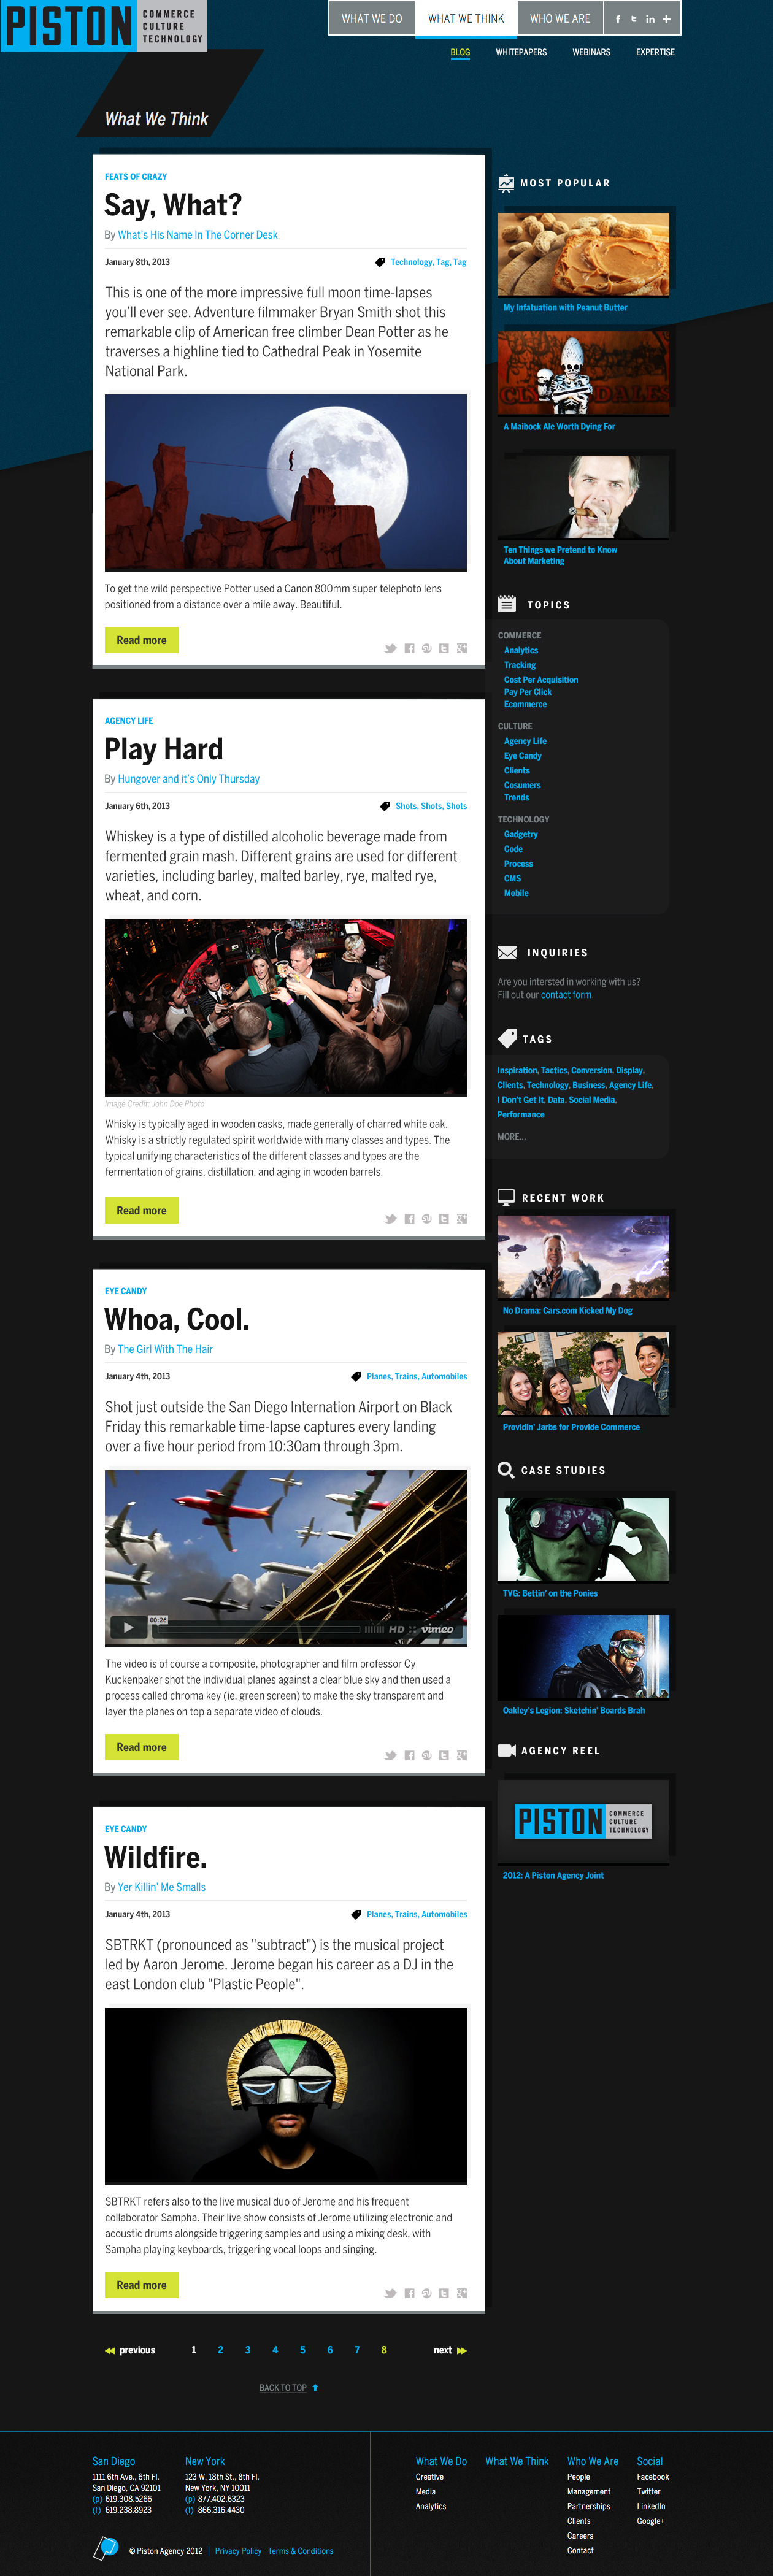 Blog Layout for New Site